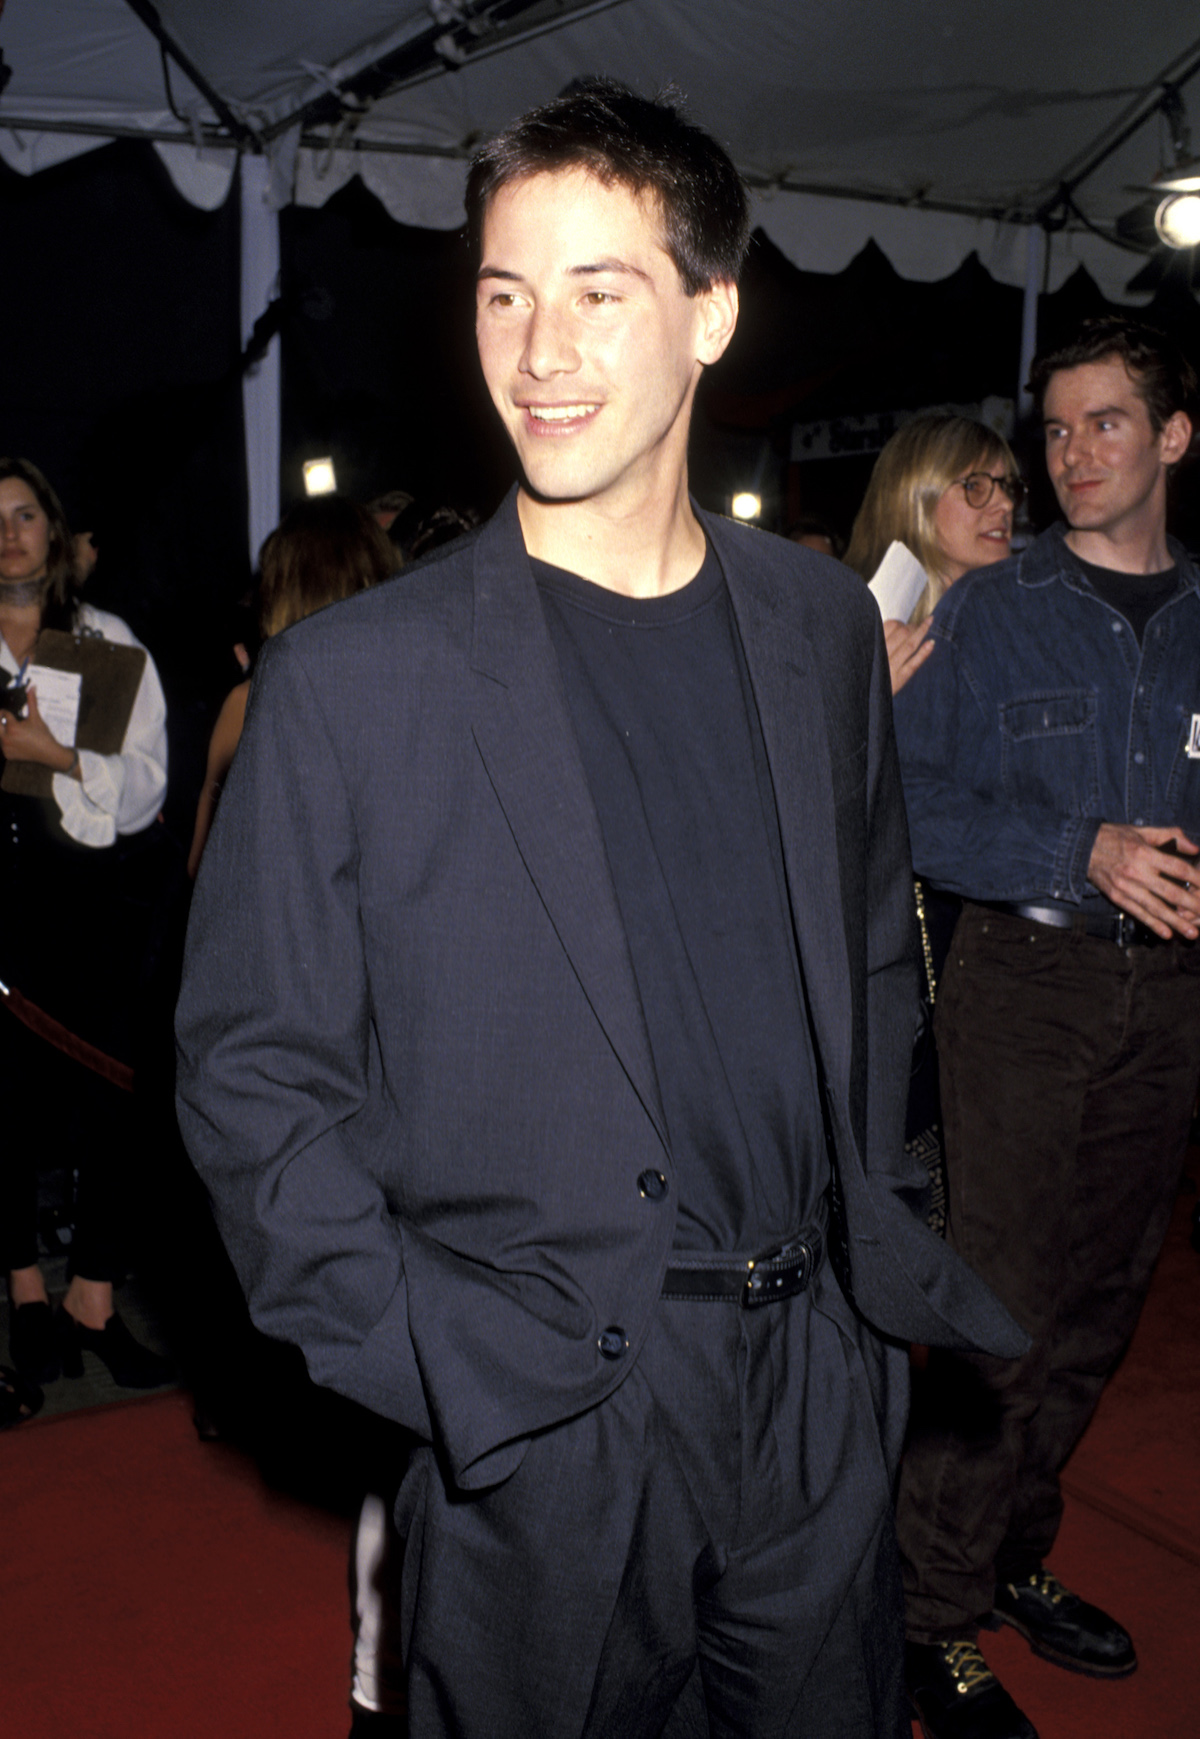 'Speed' star Keanu Reeves smiles on the red carpet